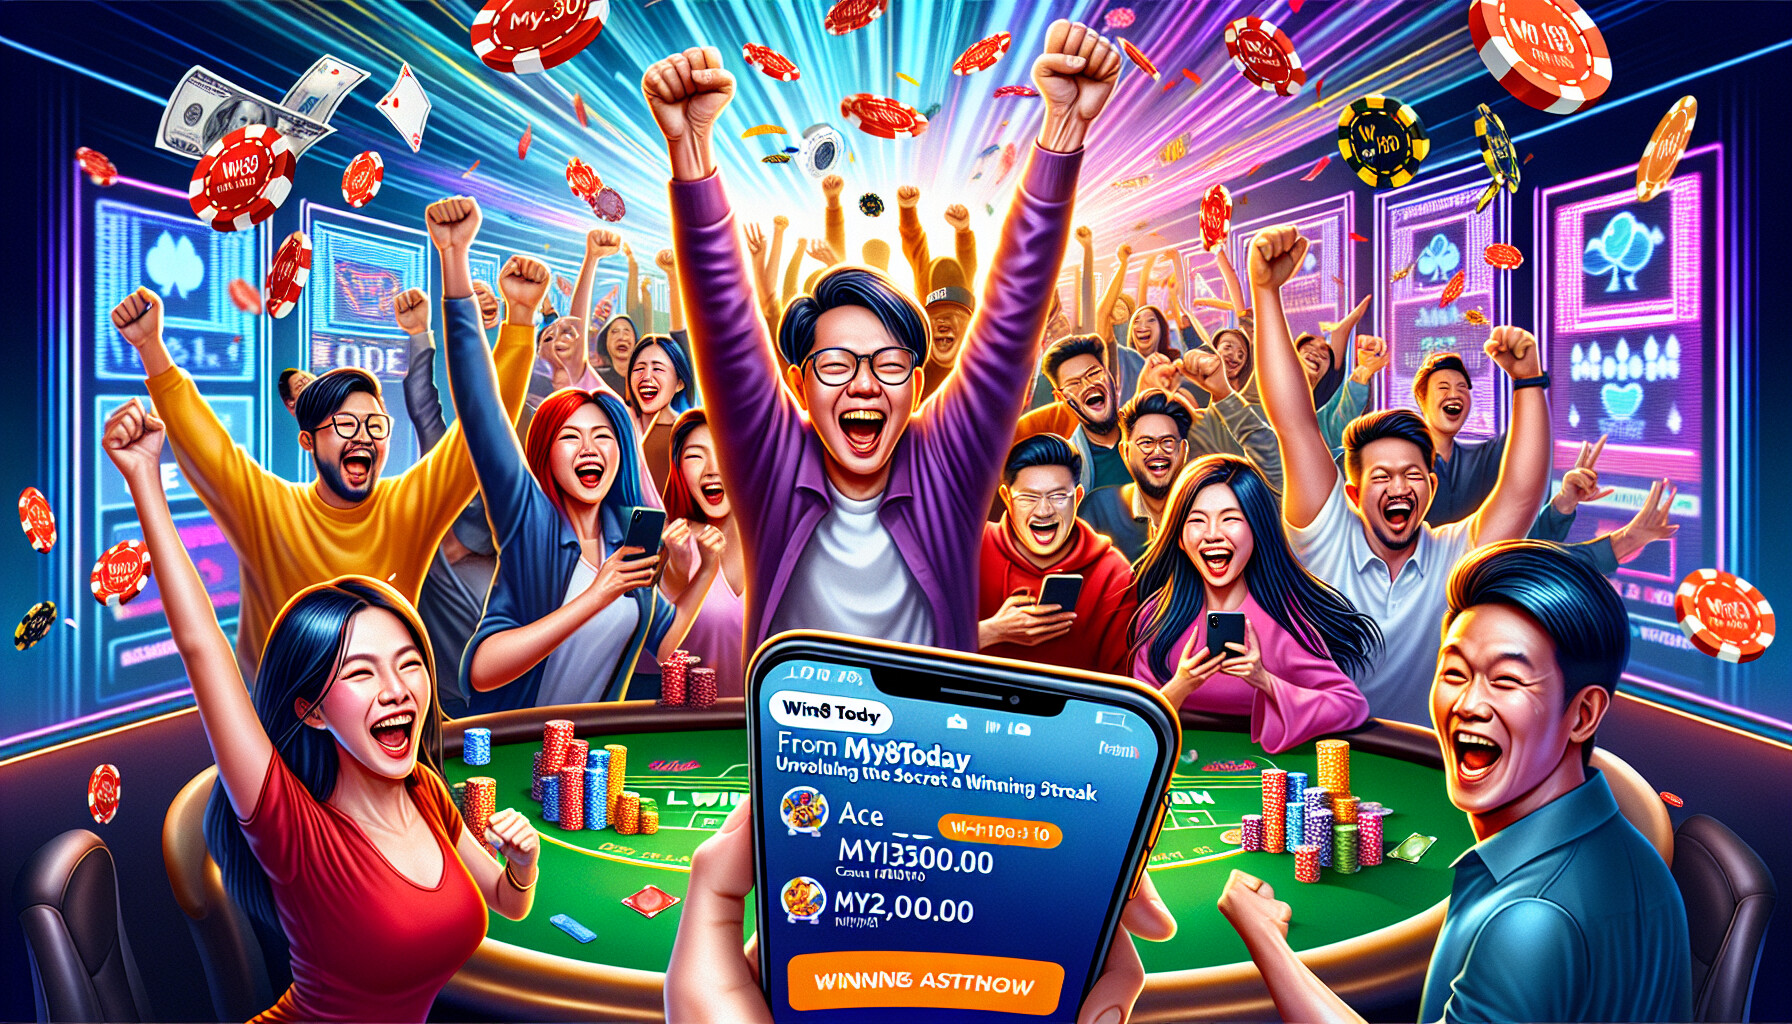 🎰🍀 Level up your luck with Ace333! 💰💥 Unleash the power of MYR1,000.00 and watch it skyrocket into MYR10,000.00! Join the winning team now! 🎉🤑